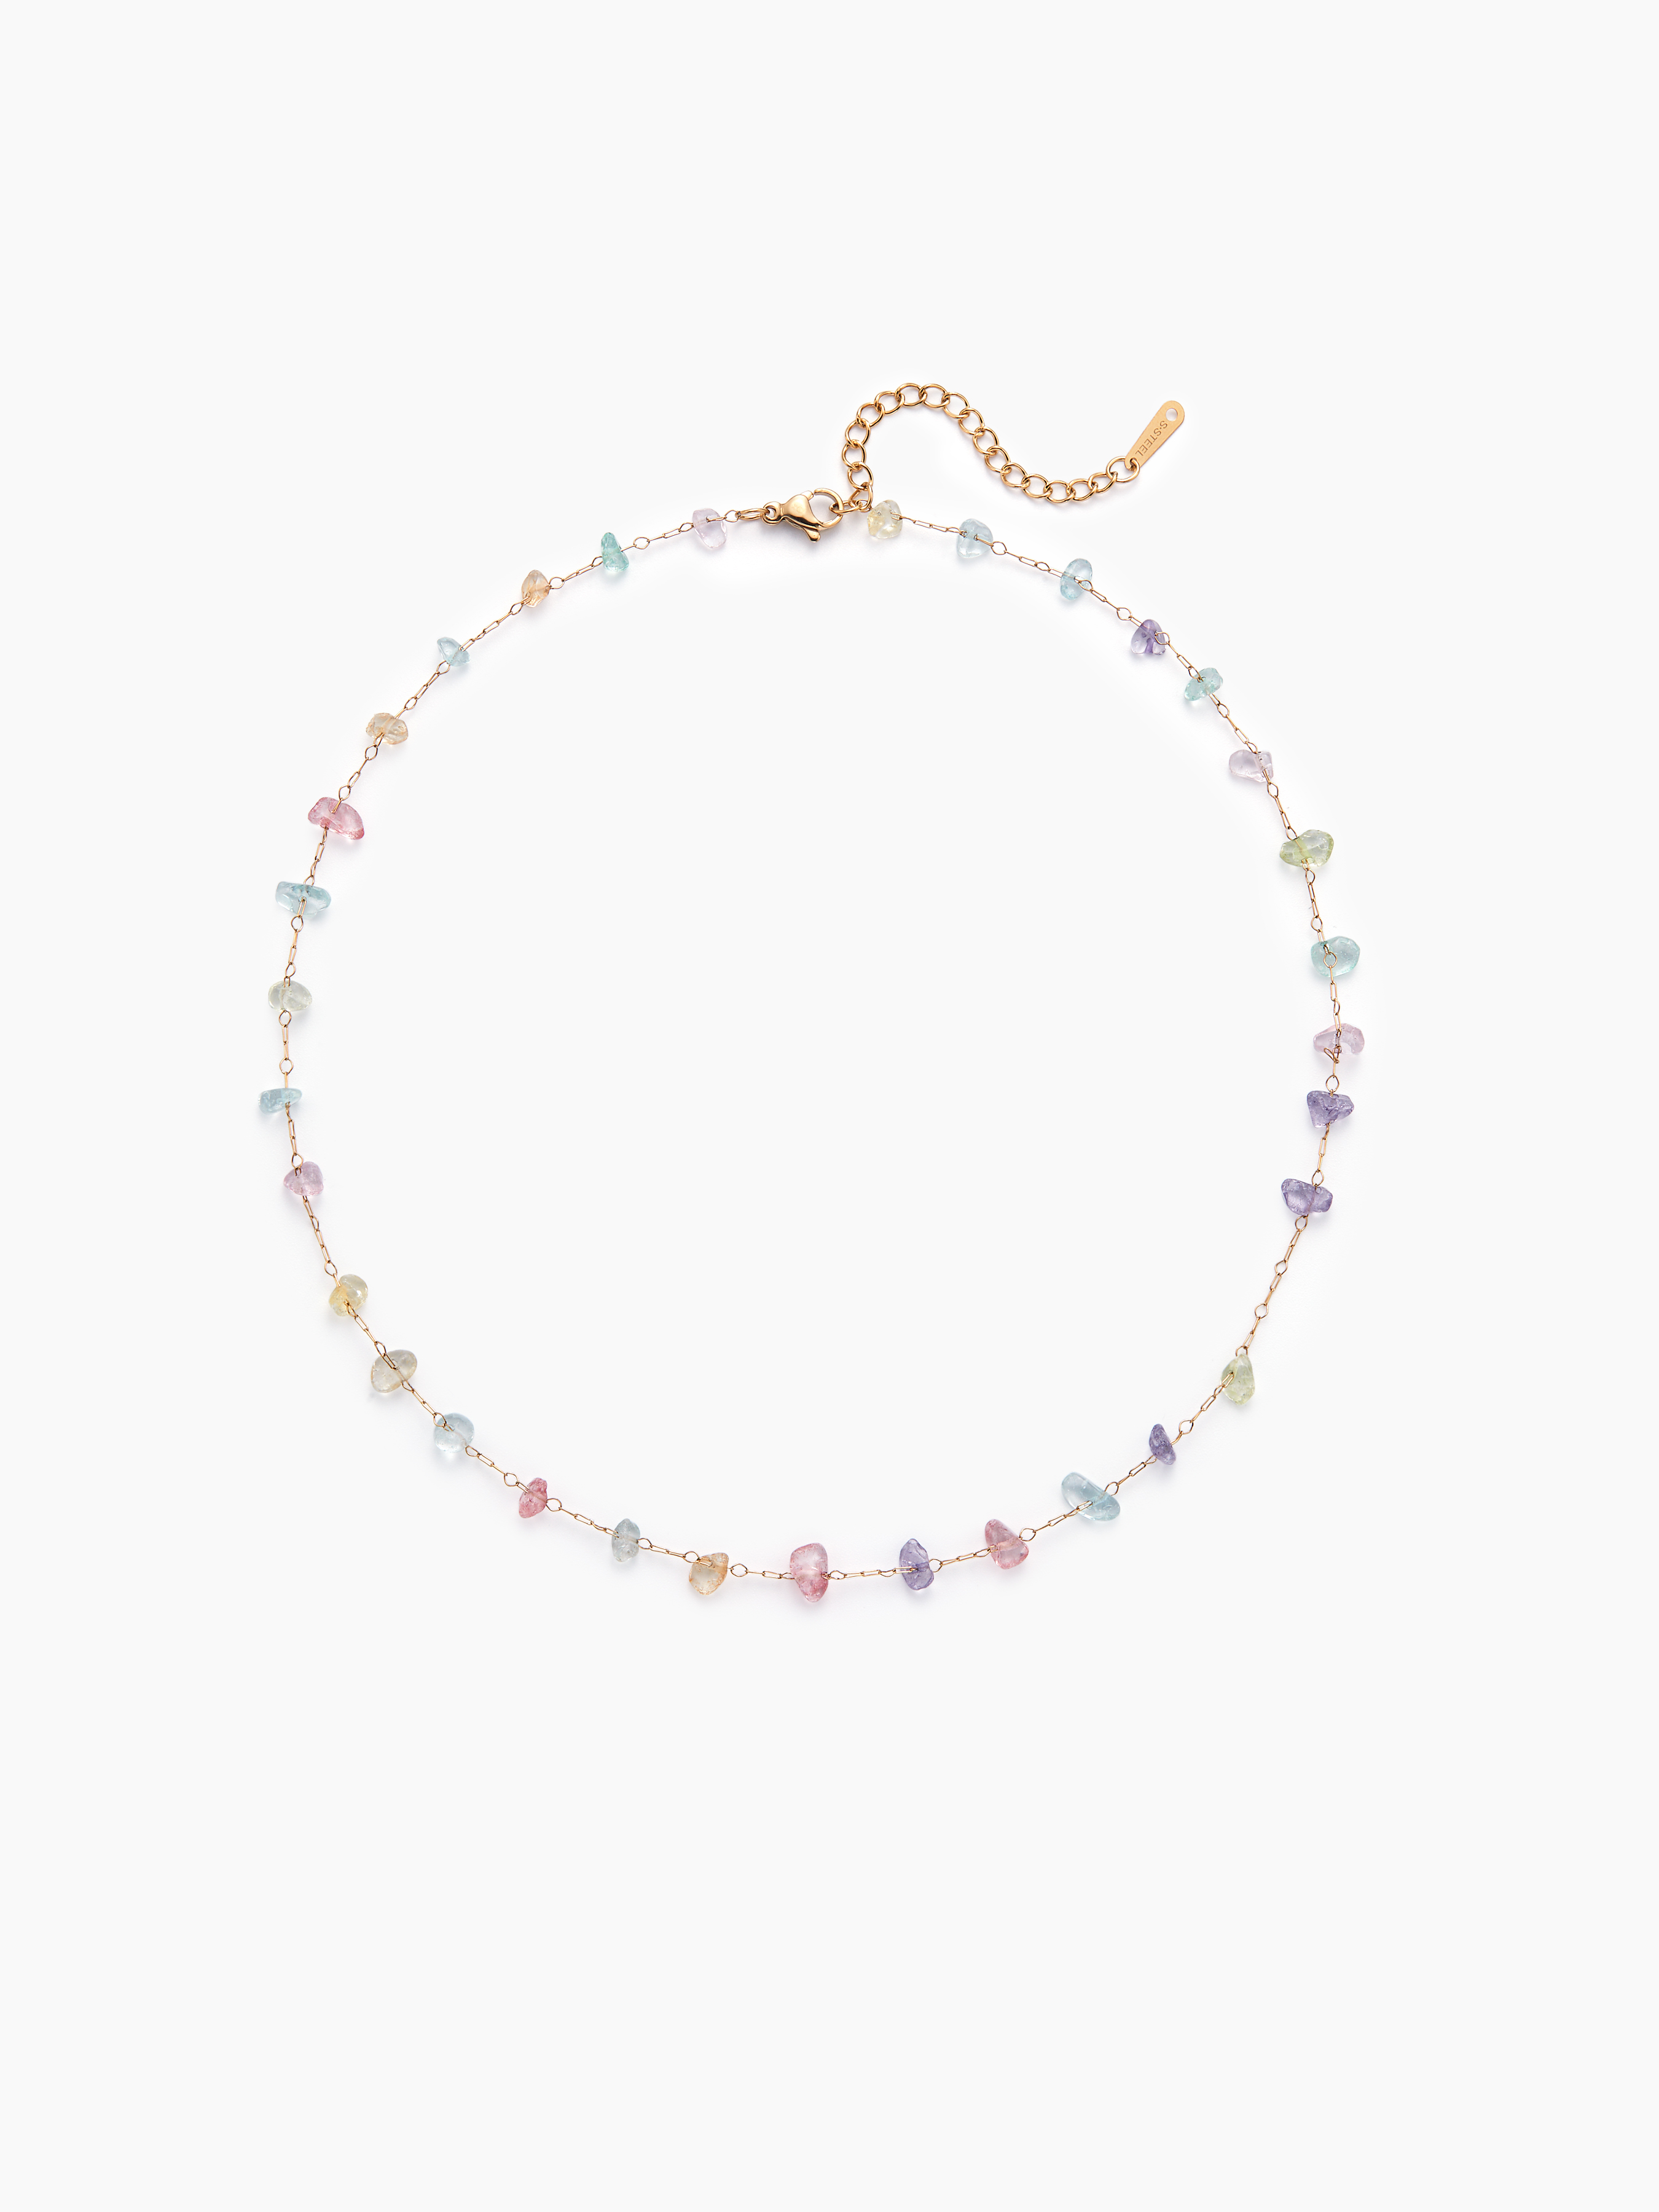 Seed Bead Necklace - White Rainbow – Caryn Lawn